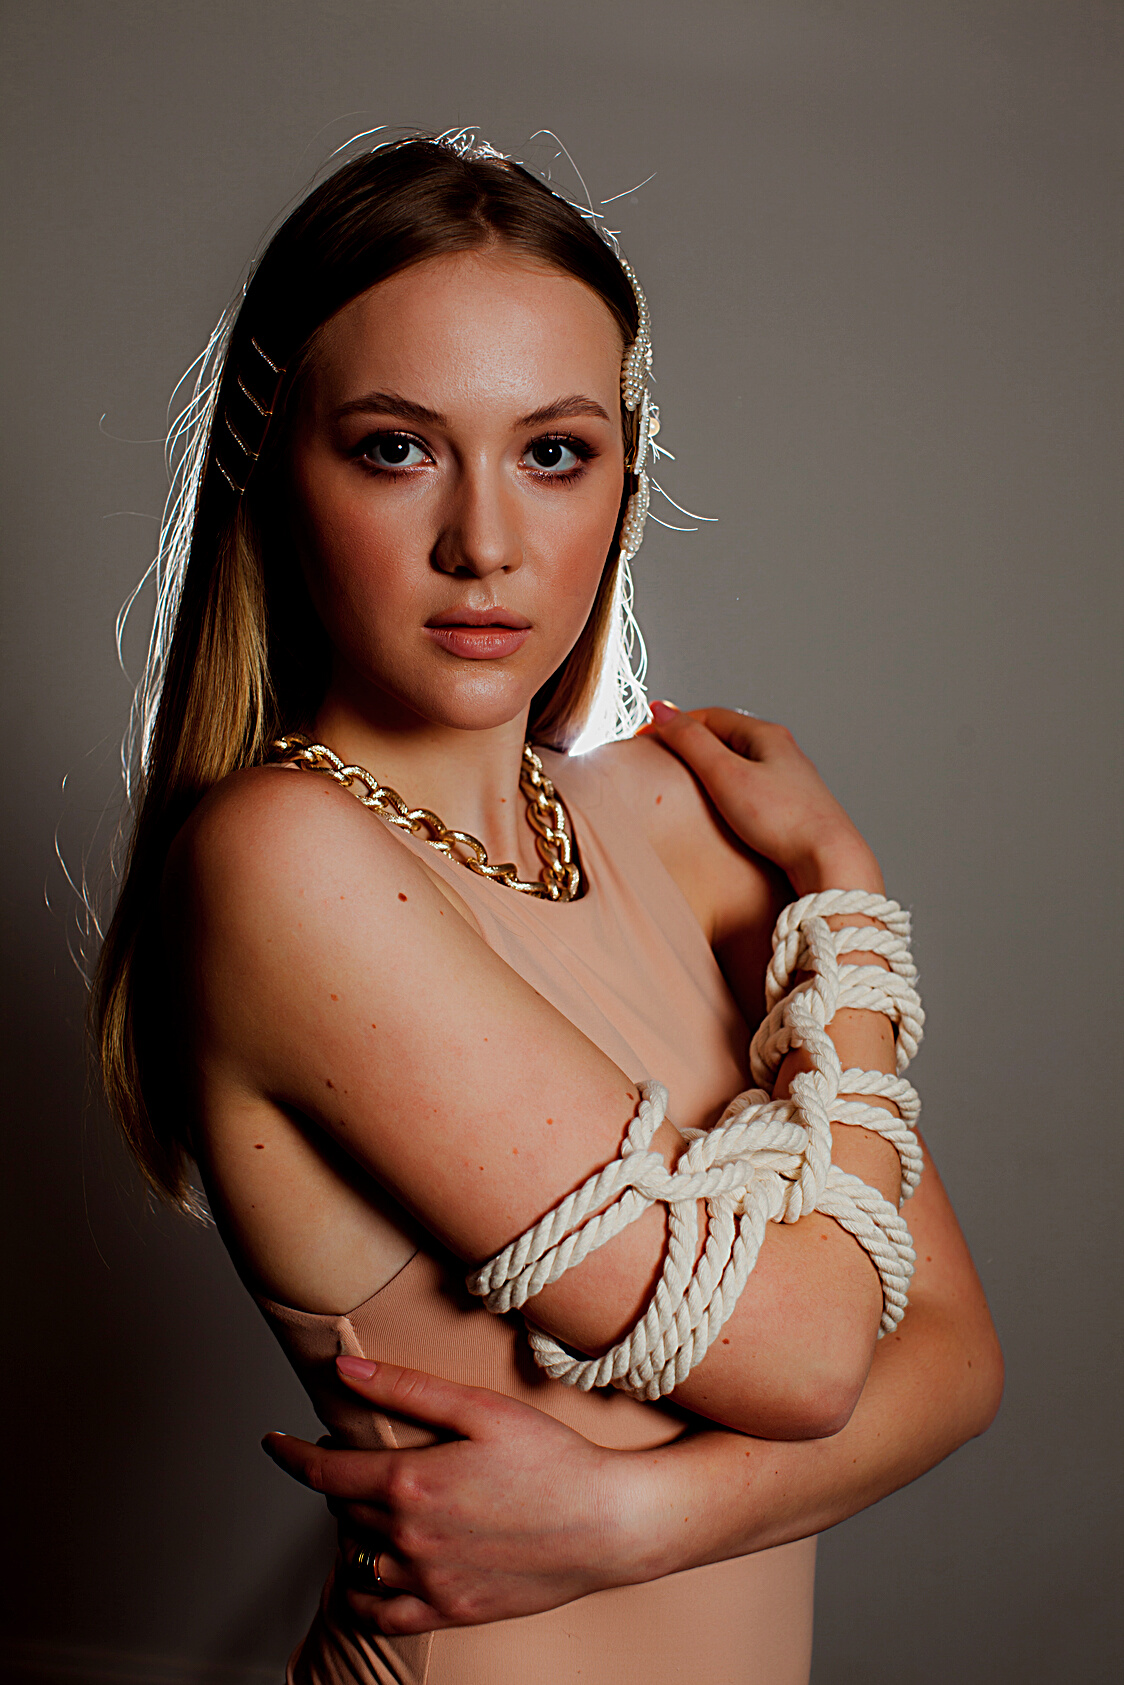 Fashion Girl with Rope Strap on Her Hand at Grey Background